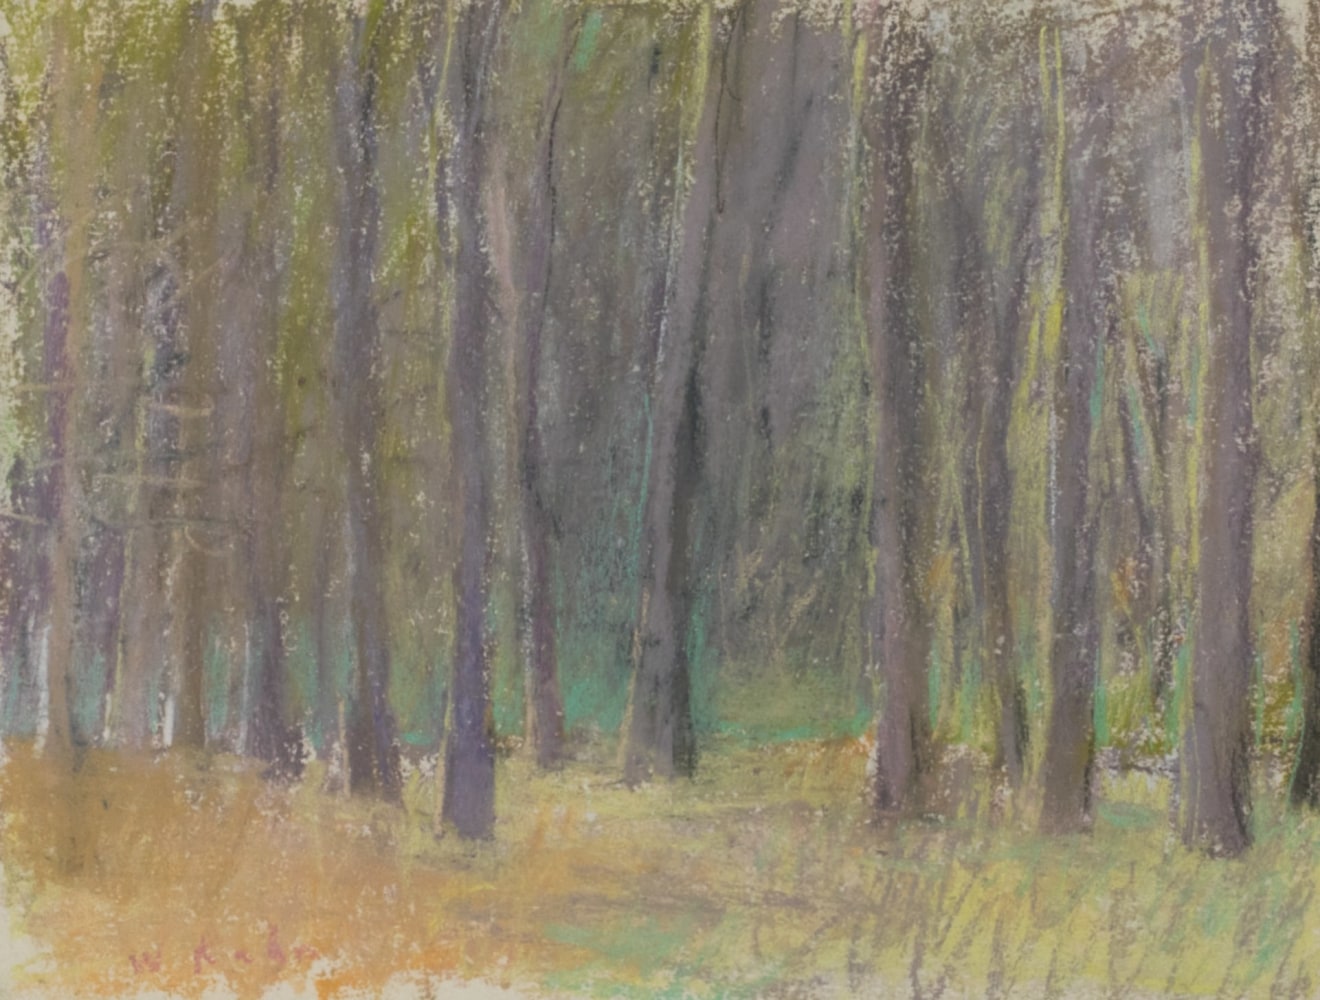 Wolf Kahn, Oaks, Pastel on paper, 1988, 9 x 12 inches, Wolf Kahn Pastels, Wolf Kahn oil pastel, Wolf Kahn Pastels for sale, Wolf Kahn art for sale, Wolf Kahn original art for sale, Wolf Kahn Artwork, Wolf Kahn Landscape paintings, Wolf Kahn trees